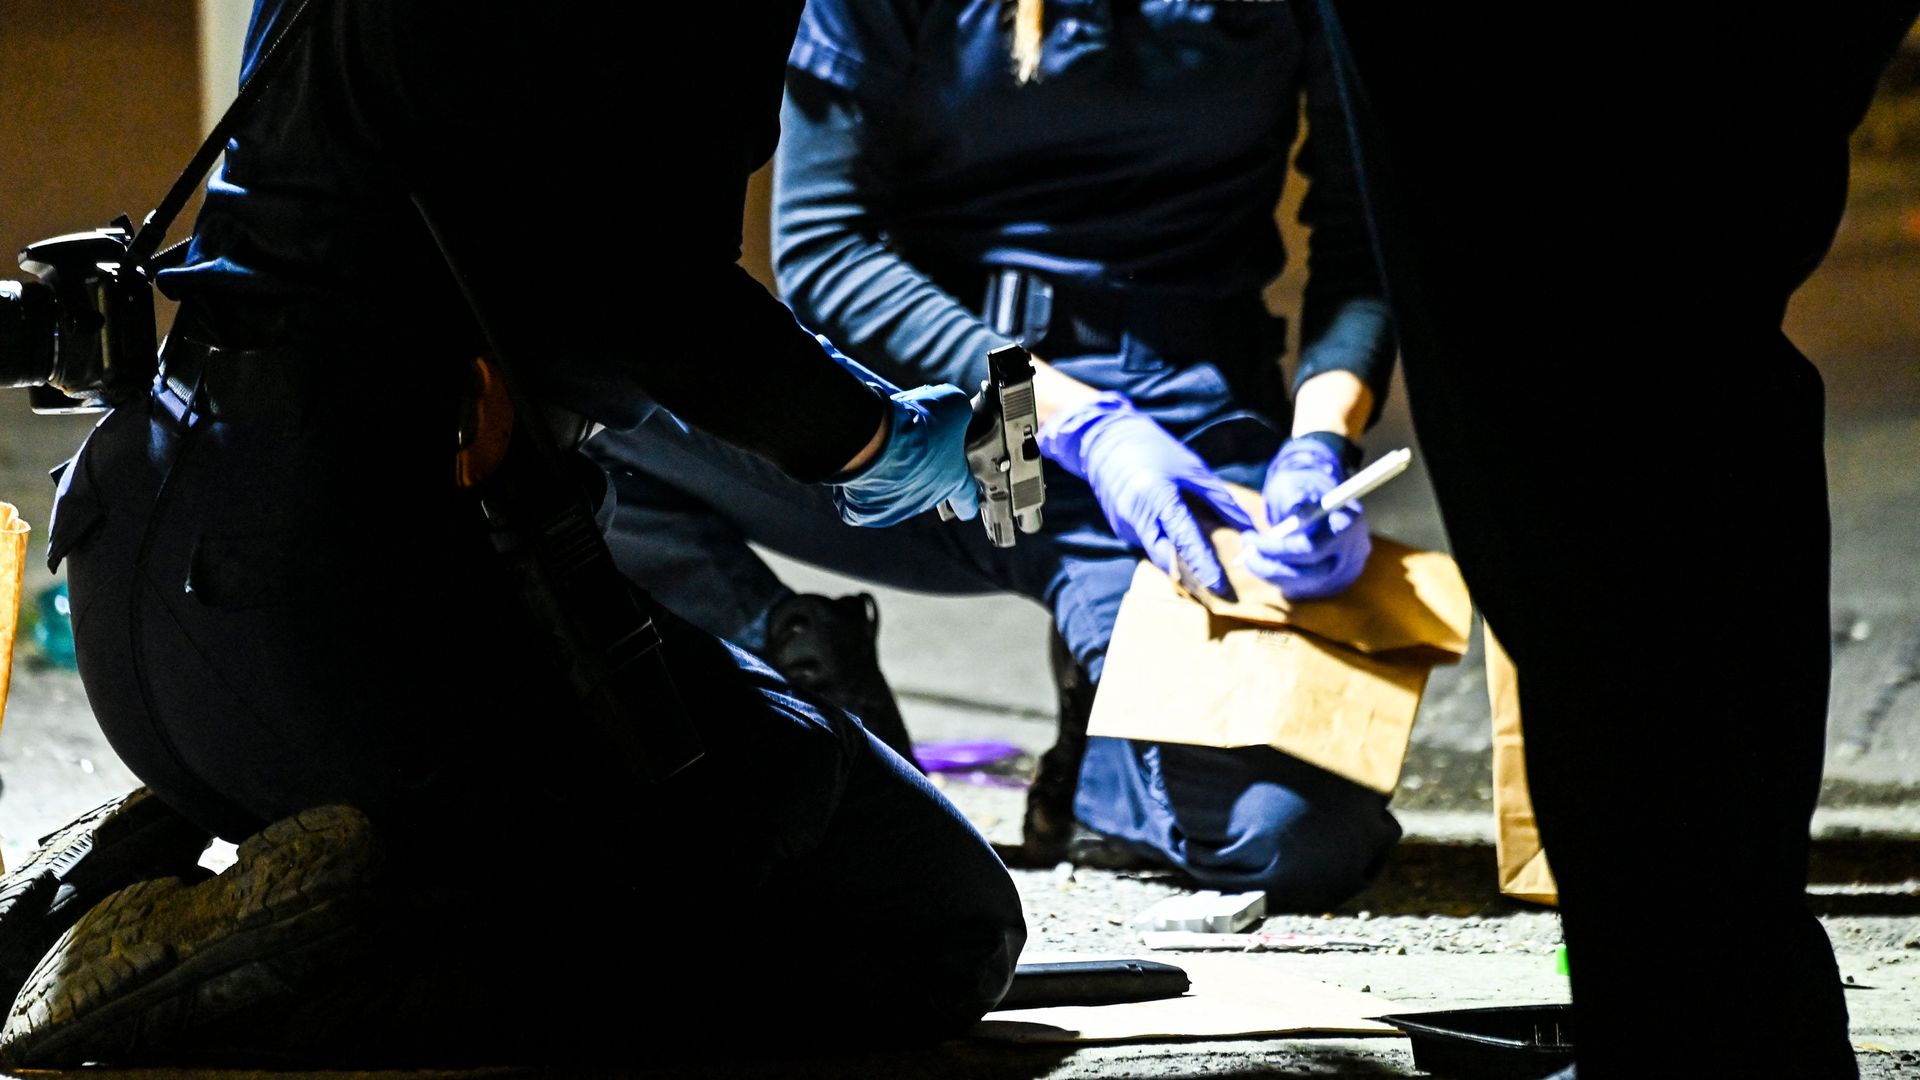 Photo shows crime scene investigators after a shooting at a Mardi Gras parade